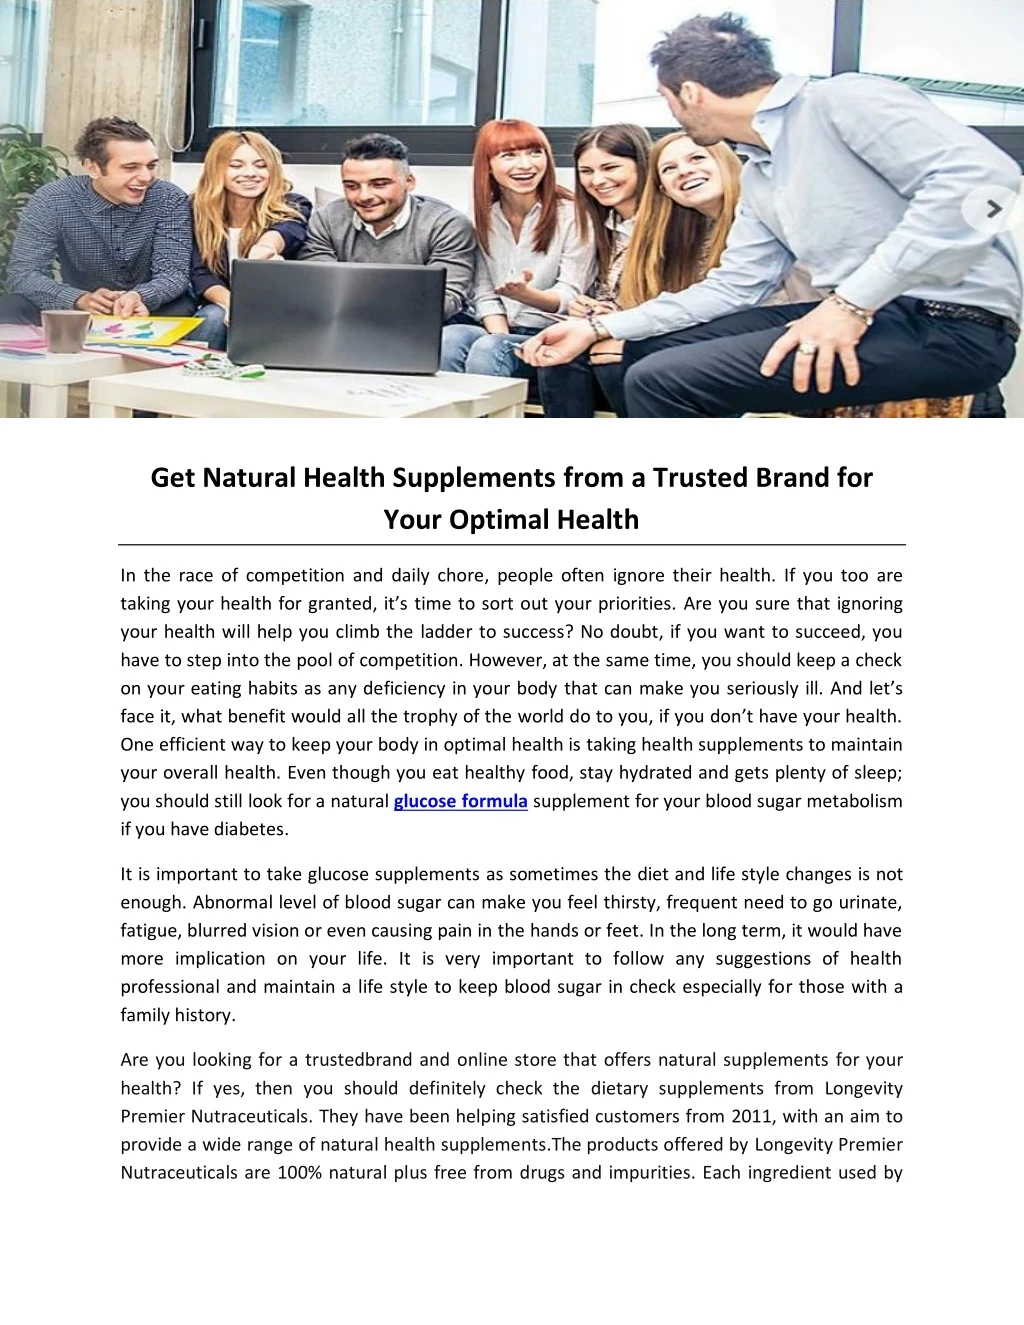 get natural health supplements from a trusted